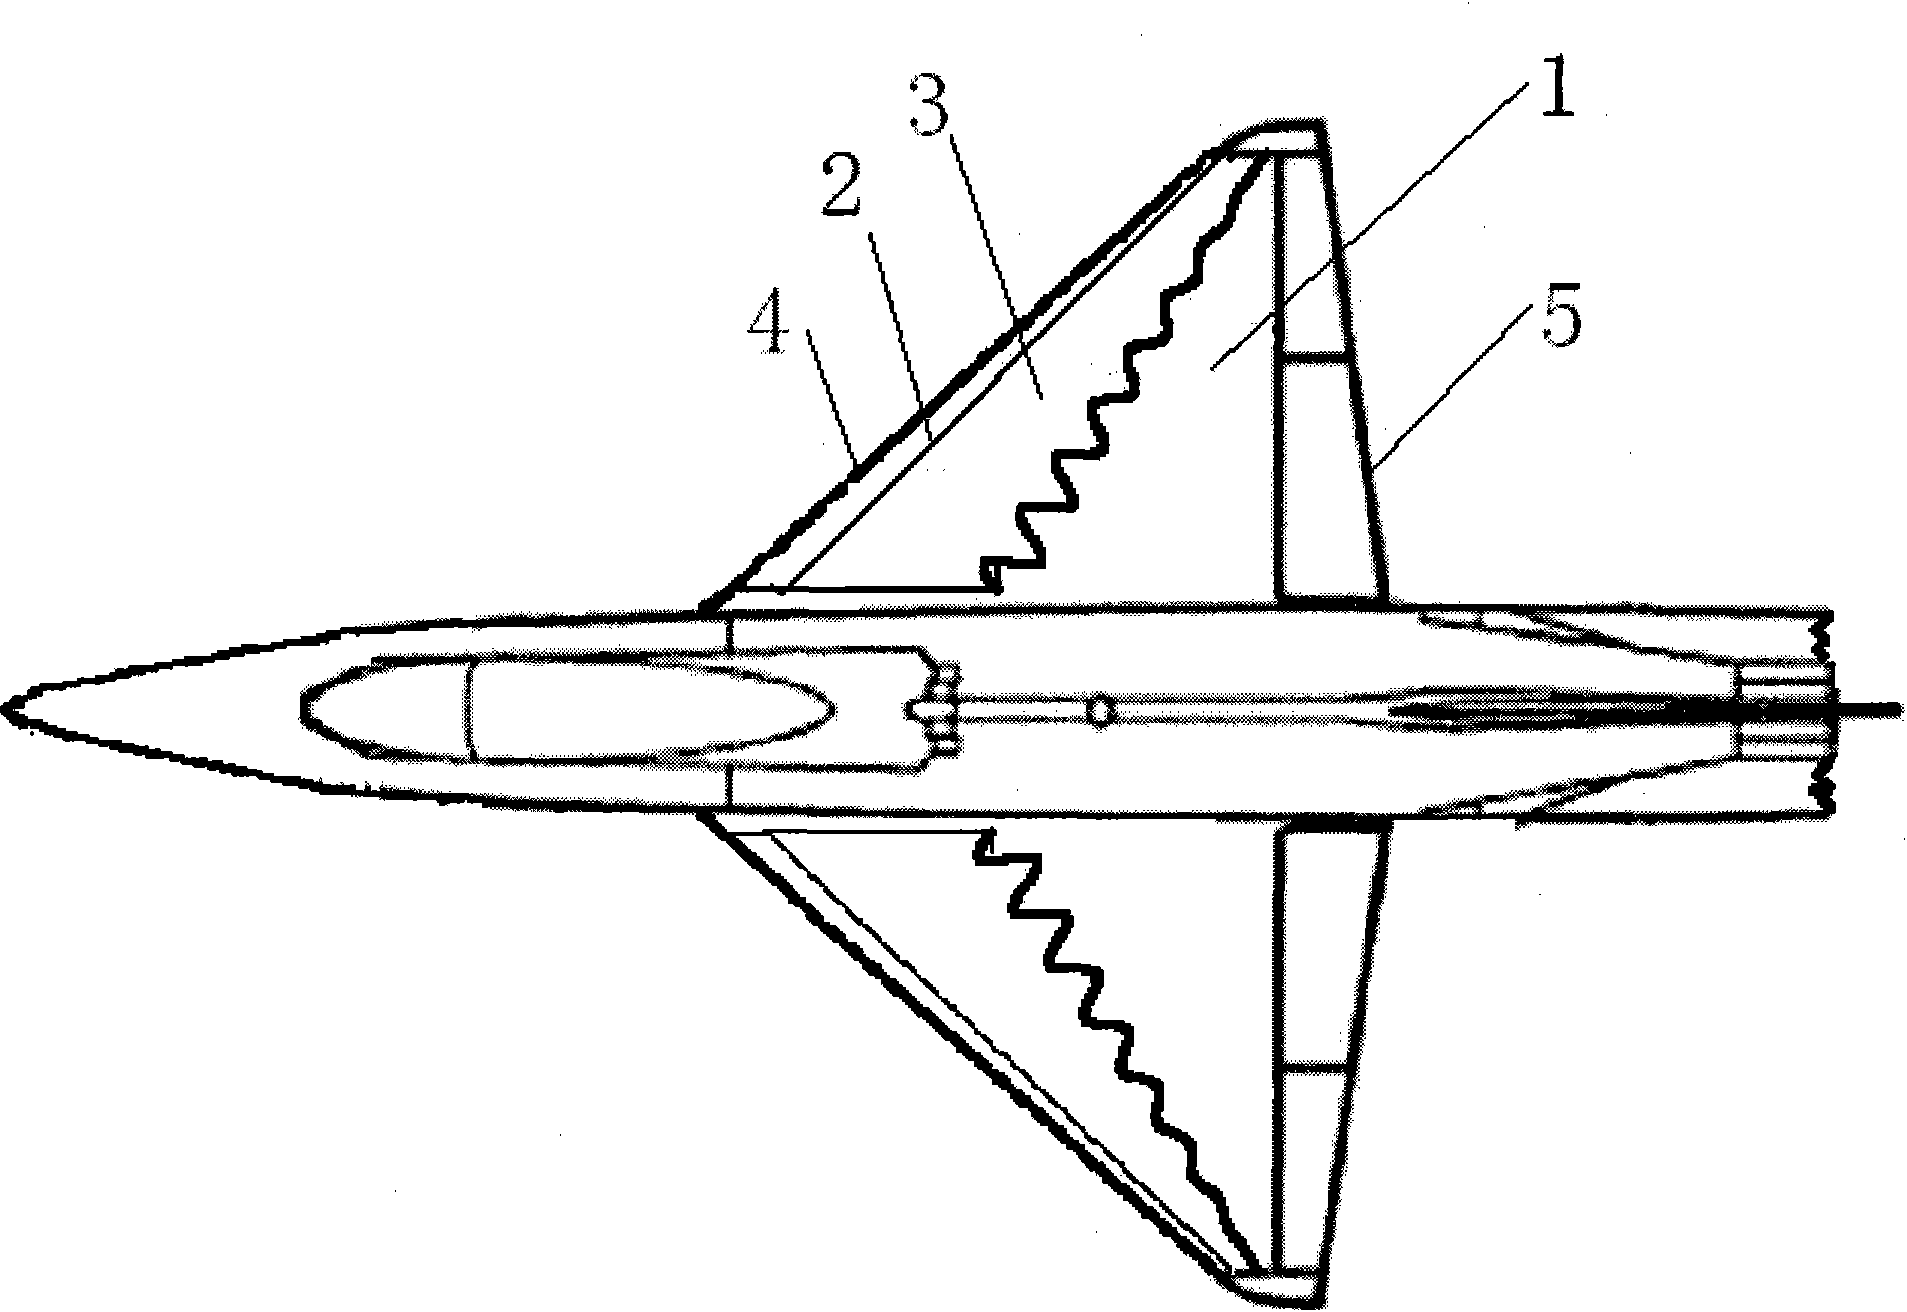 Wing plate for post-stall manipulation control of airplane